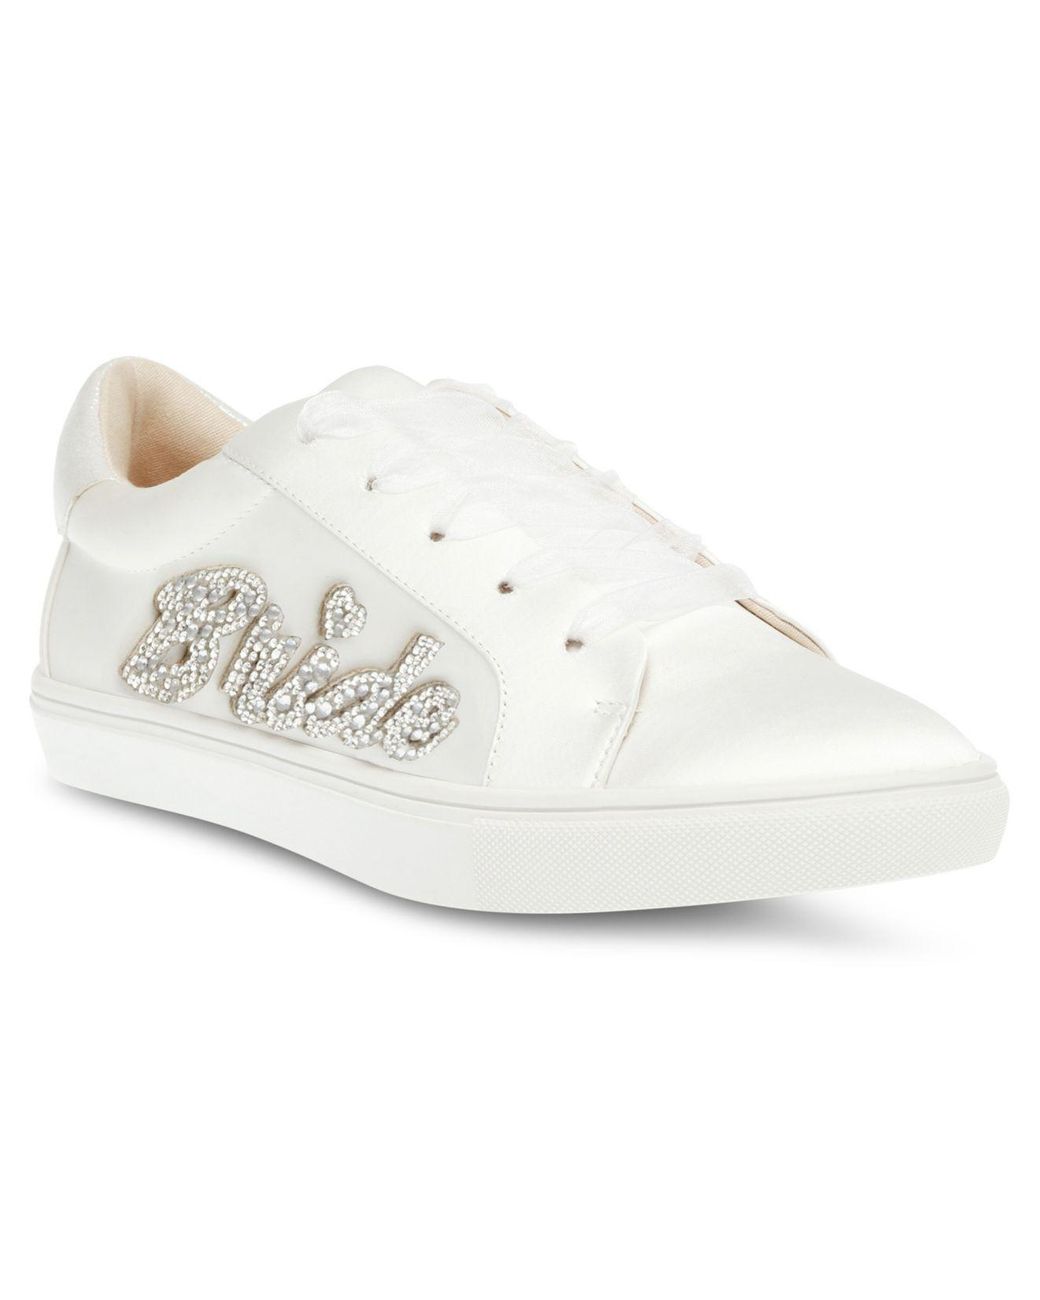 Betsey Johnson Kane Bride Lace Up Sneaker in White | Lyst